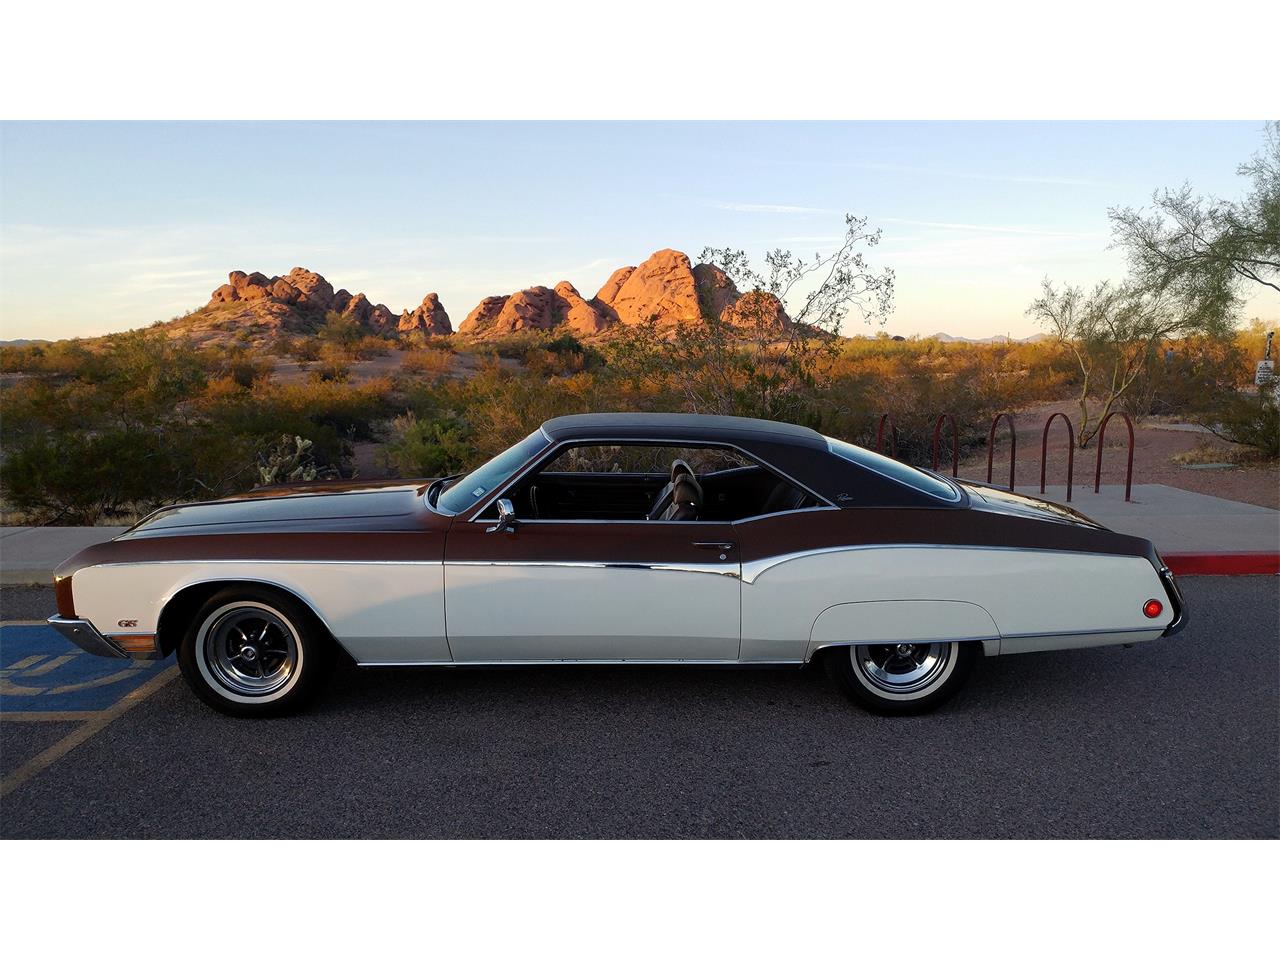 1970 buick riviera for sale classiccars com cc 1292776 1970 buick riviera for sale